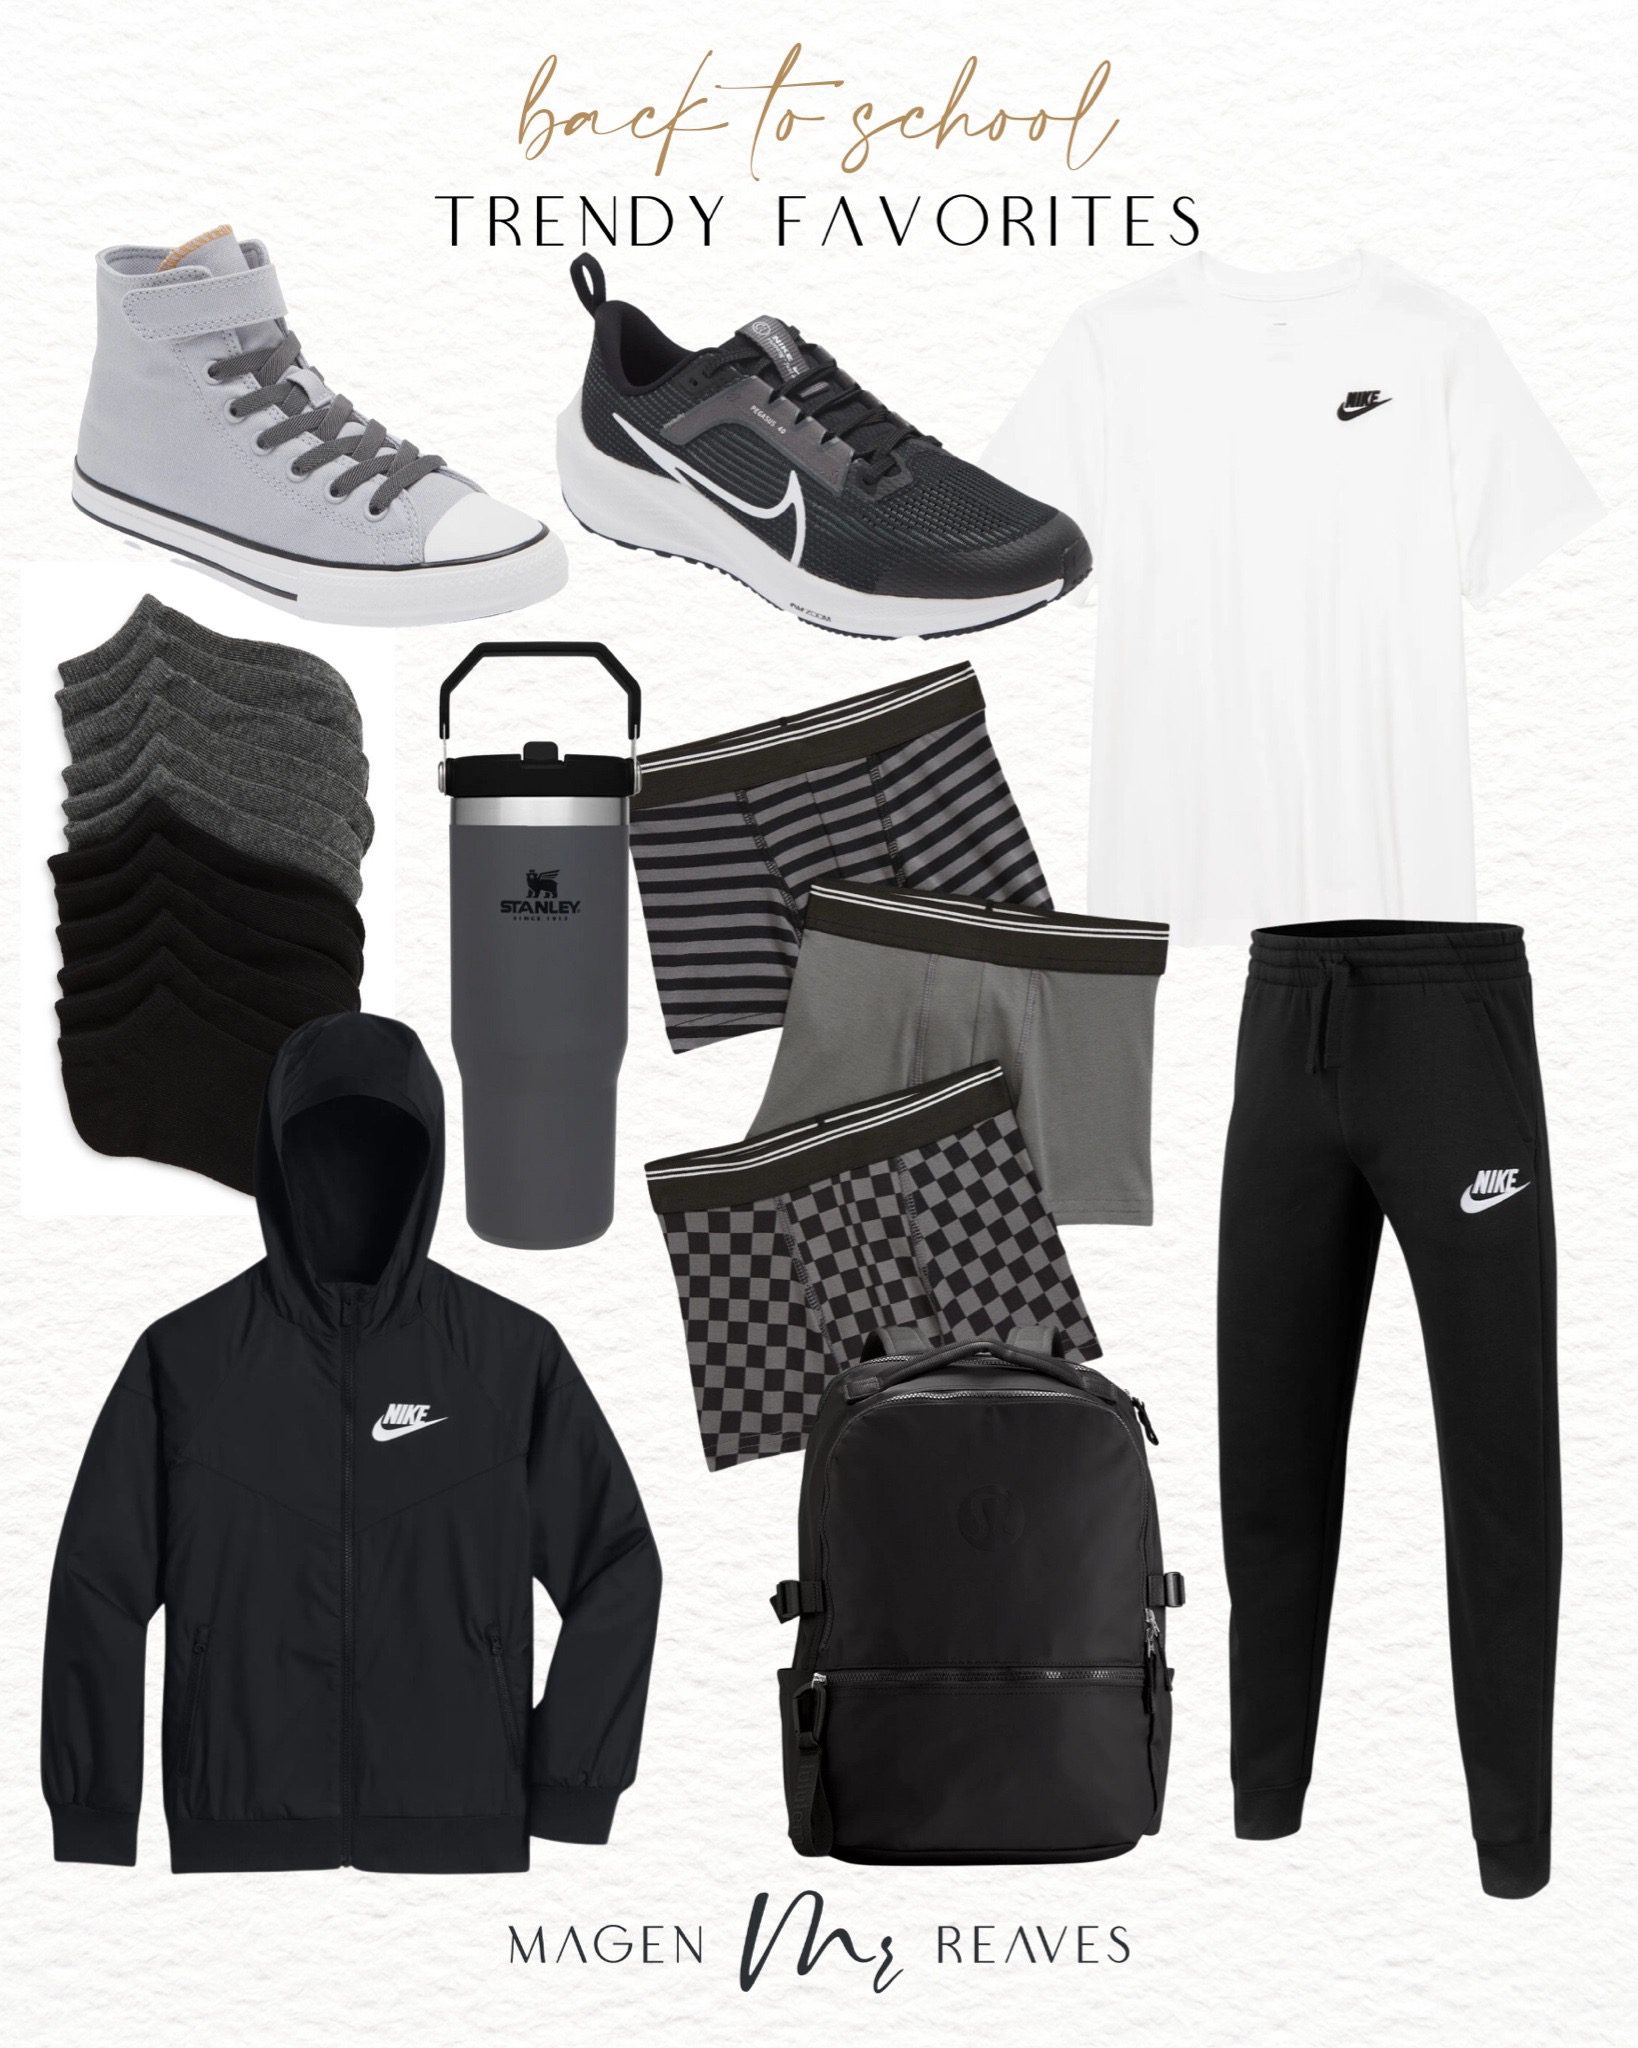 back-to-school favorites for boys